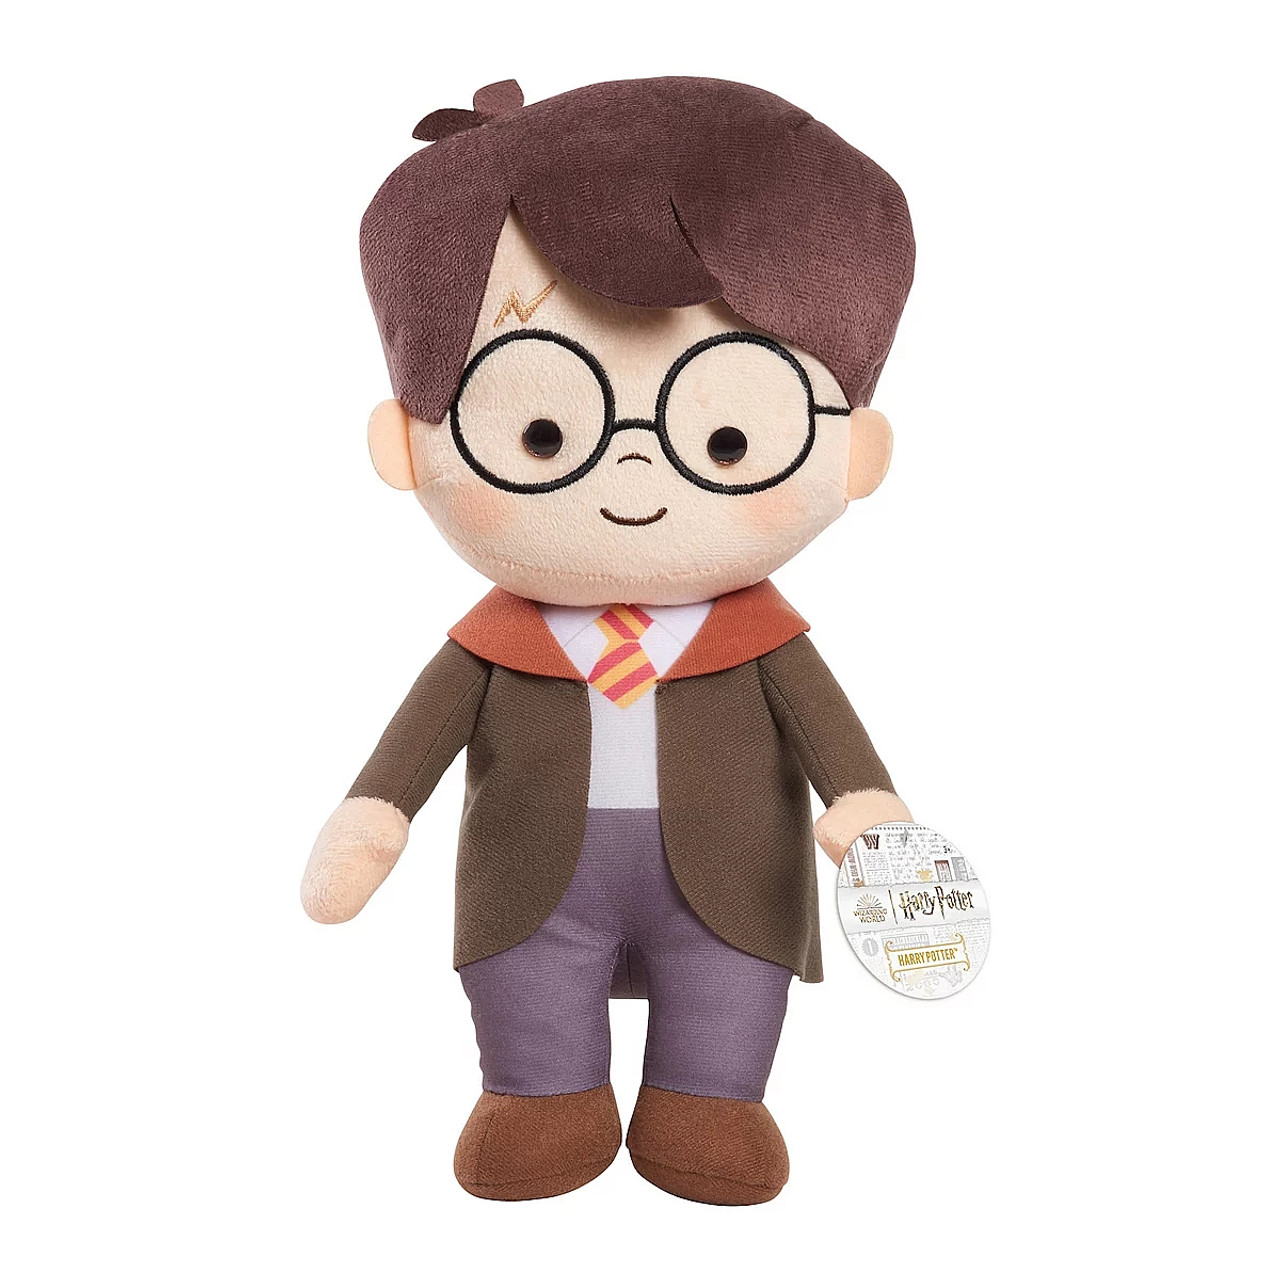 Harry Potter Plush 10 Character Doll by Just Play - Little Dreamers Pajamas